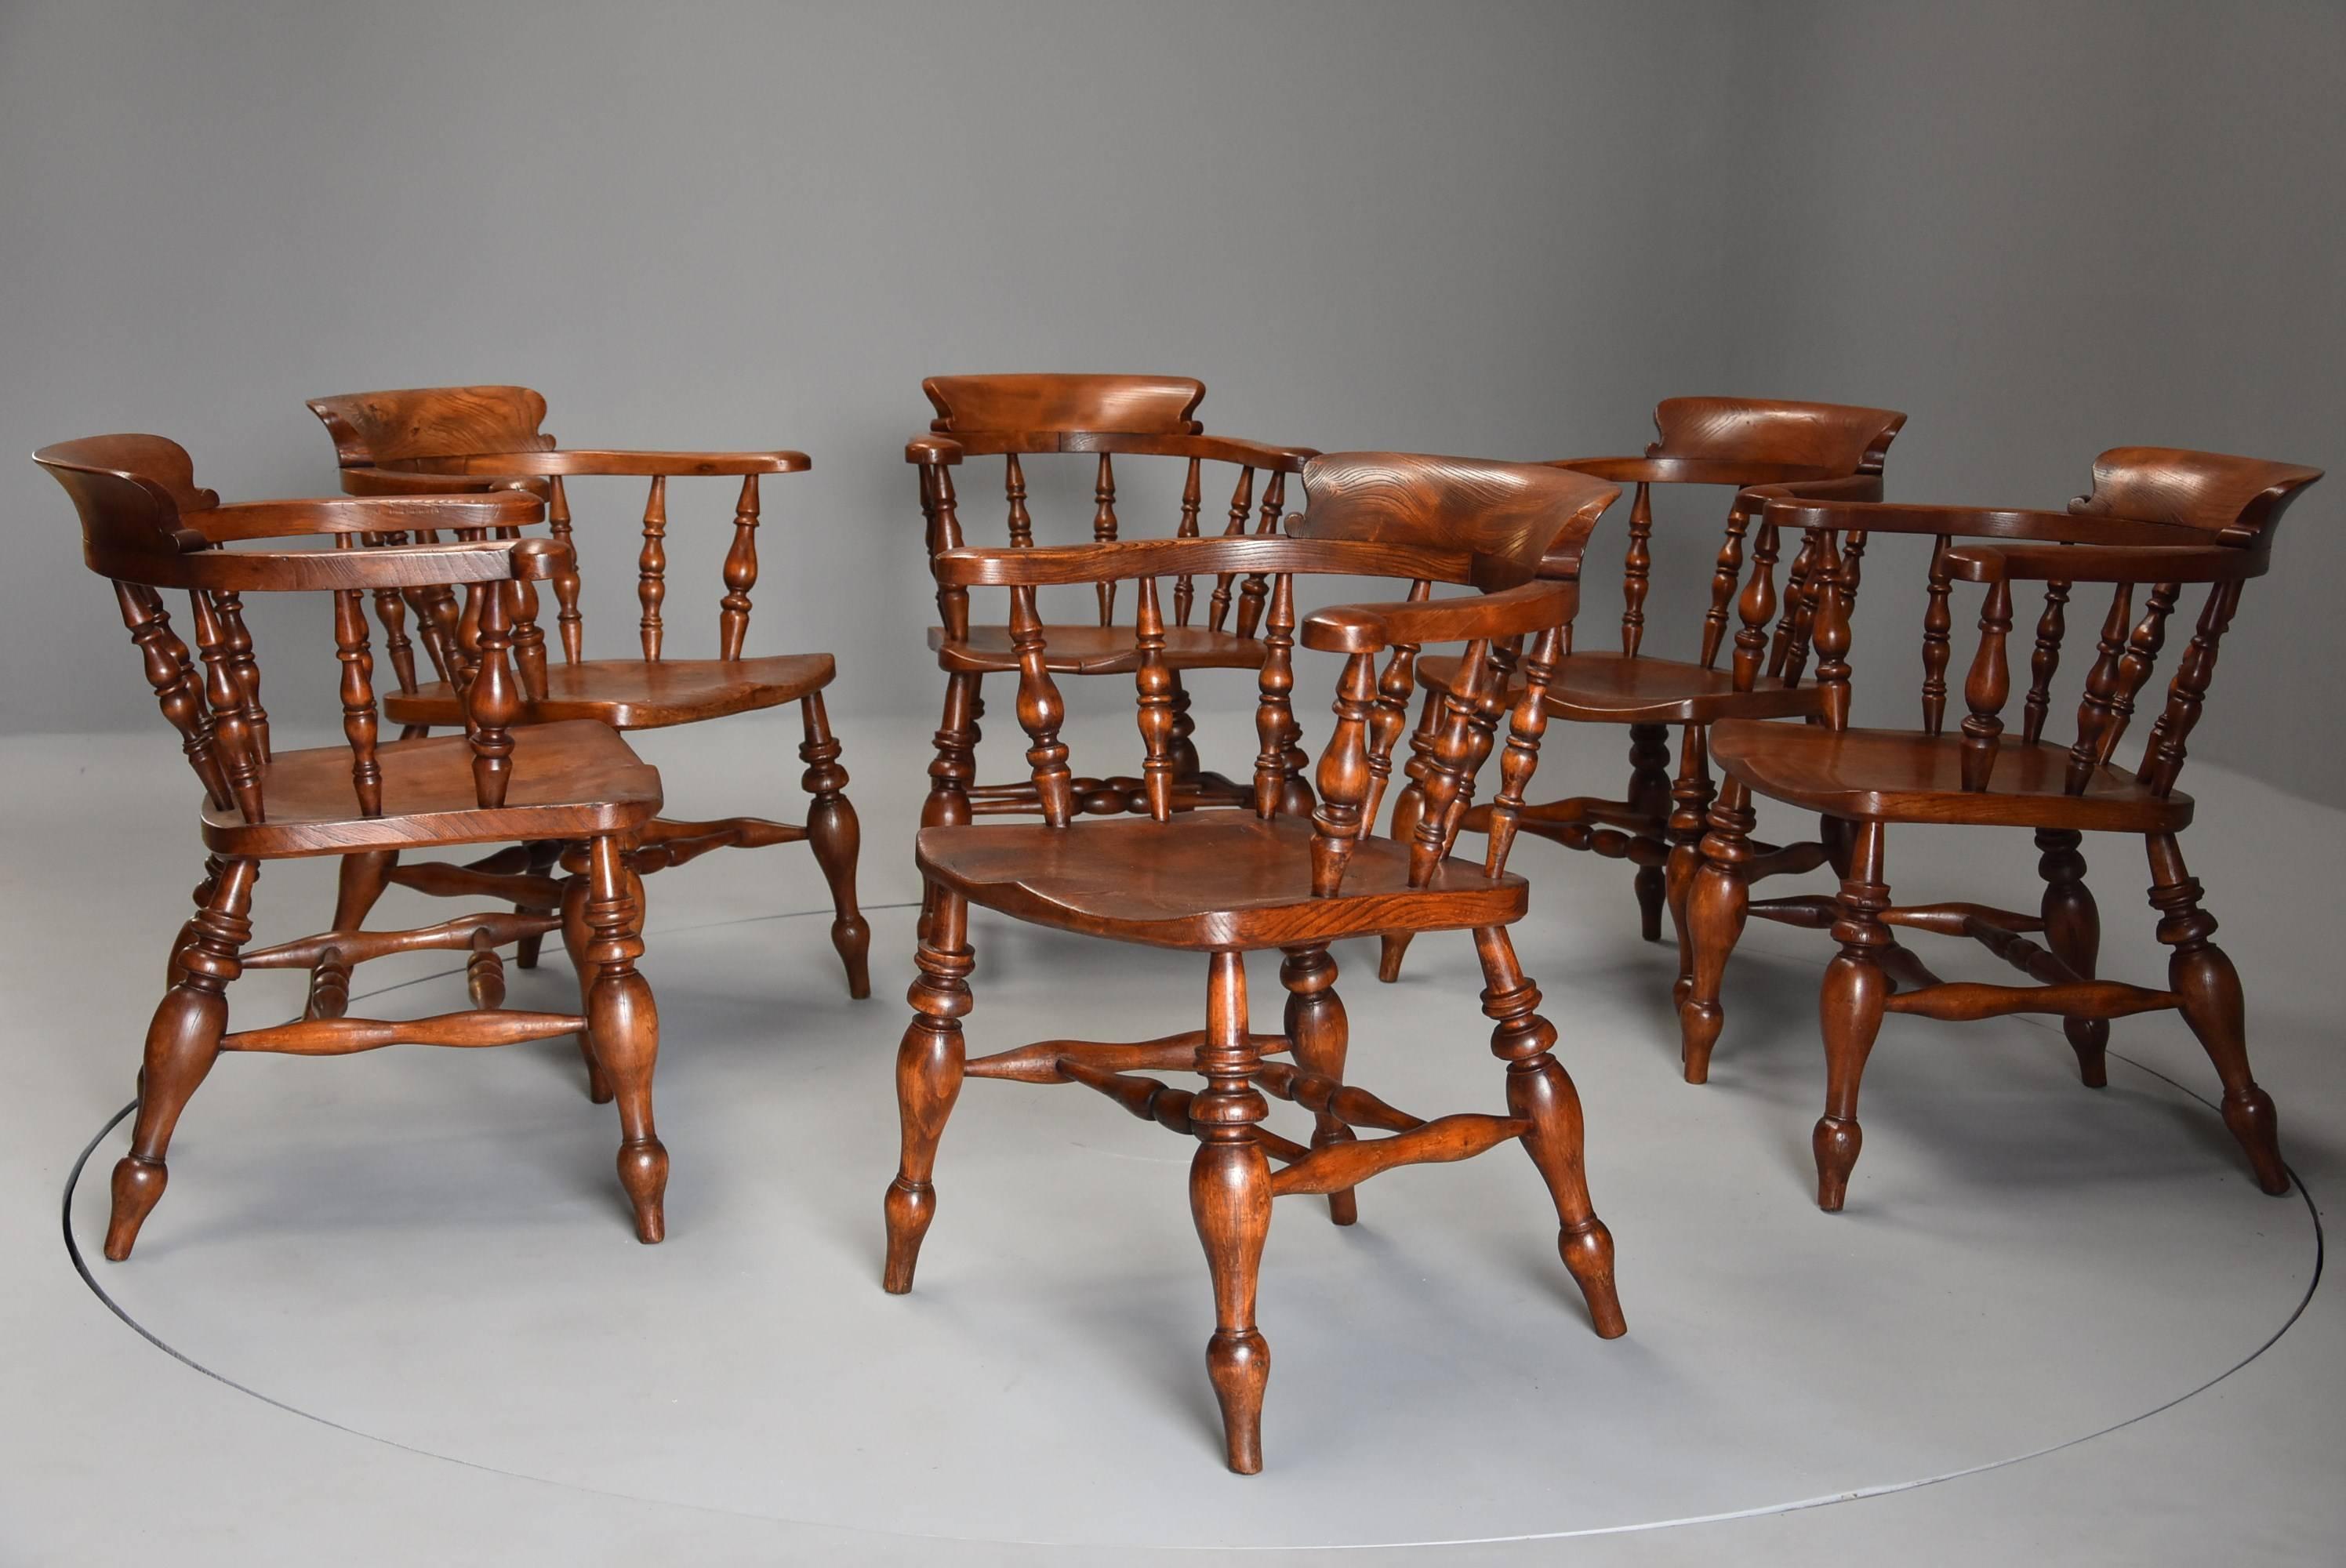 A wonderful true set of six mid-19th century nicely figured elm Smokers bow Windsor chairs or office chairs of good color with stamped initials ‘FW’ possibly from the Nottinghamshire area, England, UK.

The chairs consist of a deep, shaped back